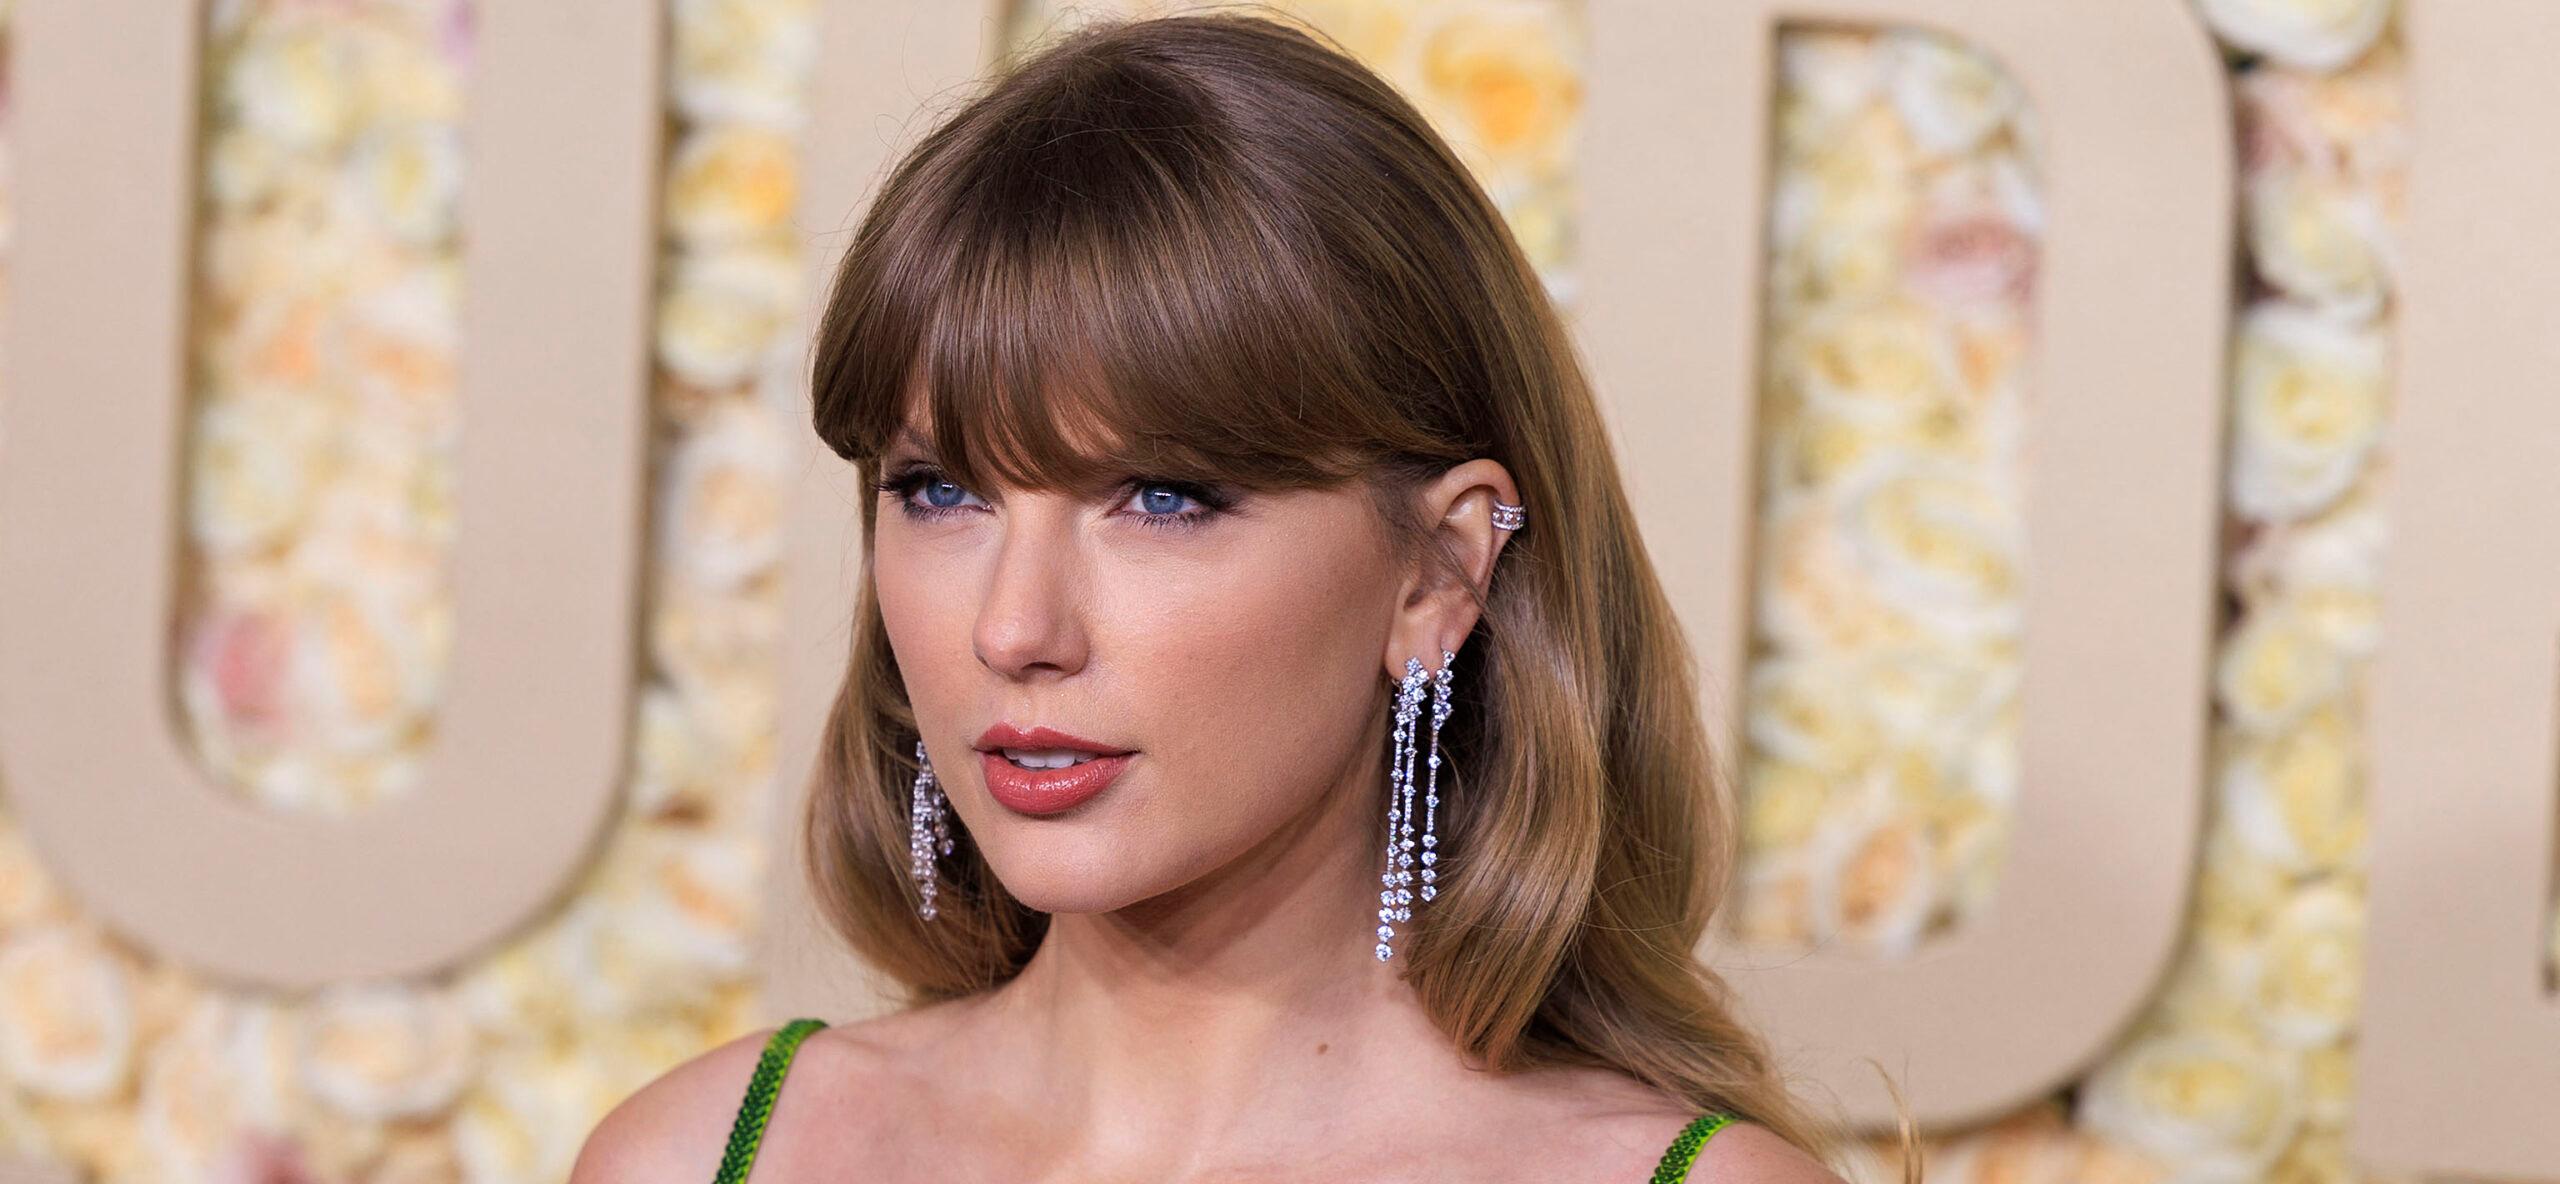 Taylor Swift’s Stalker Pleads Not Guilty After Visiting Her Home 30 Times